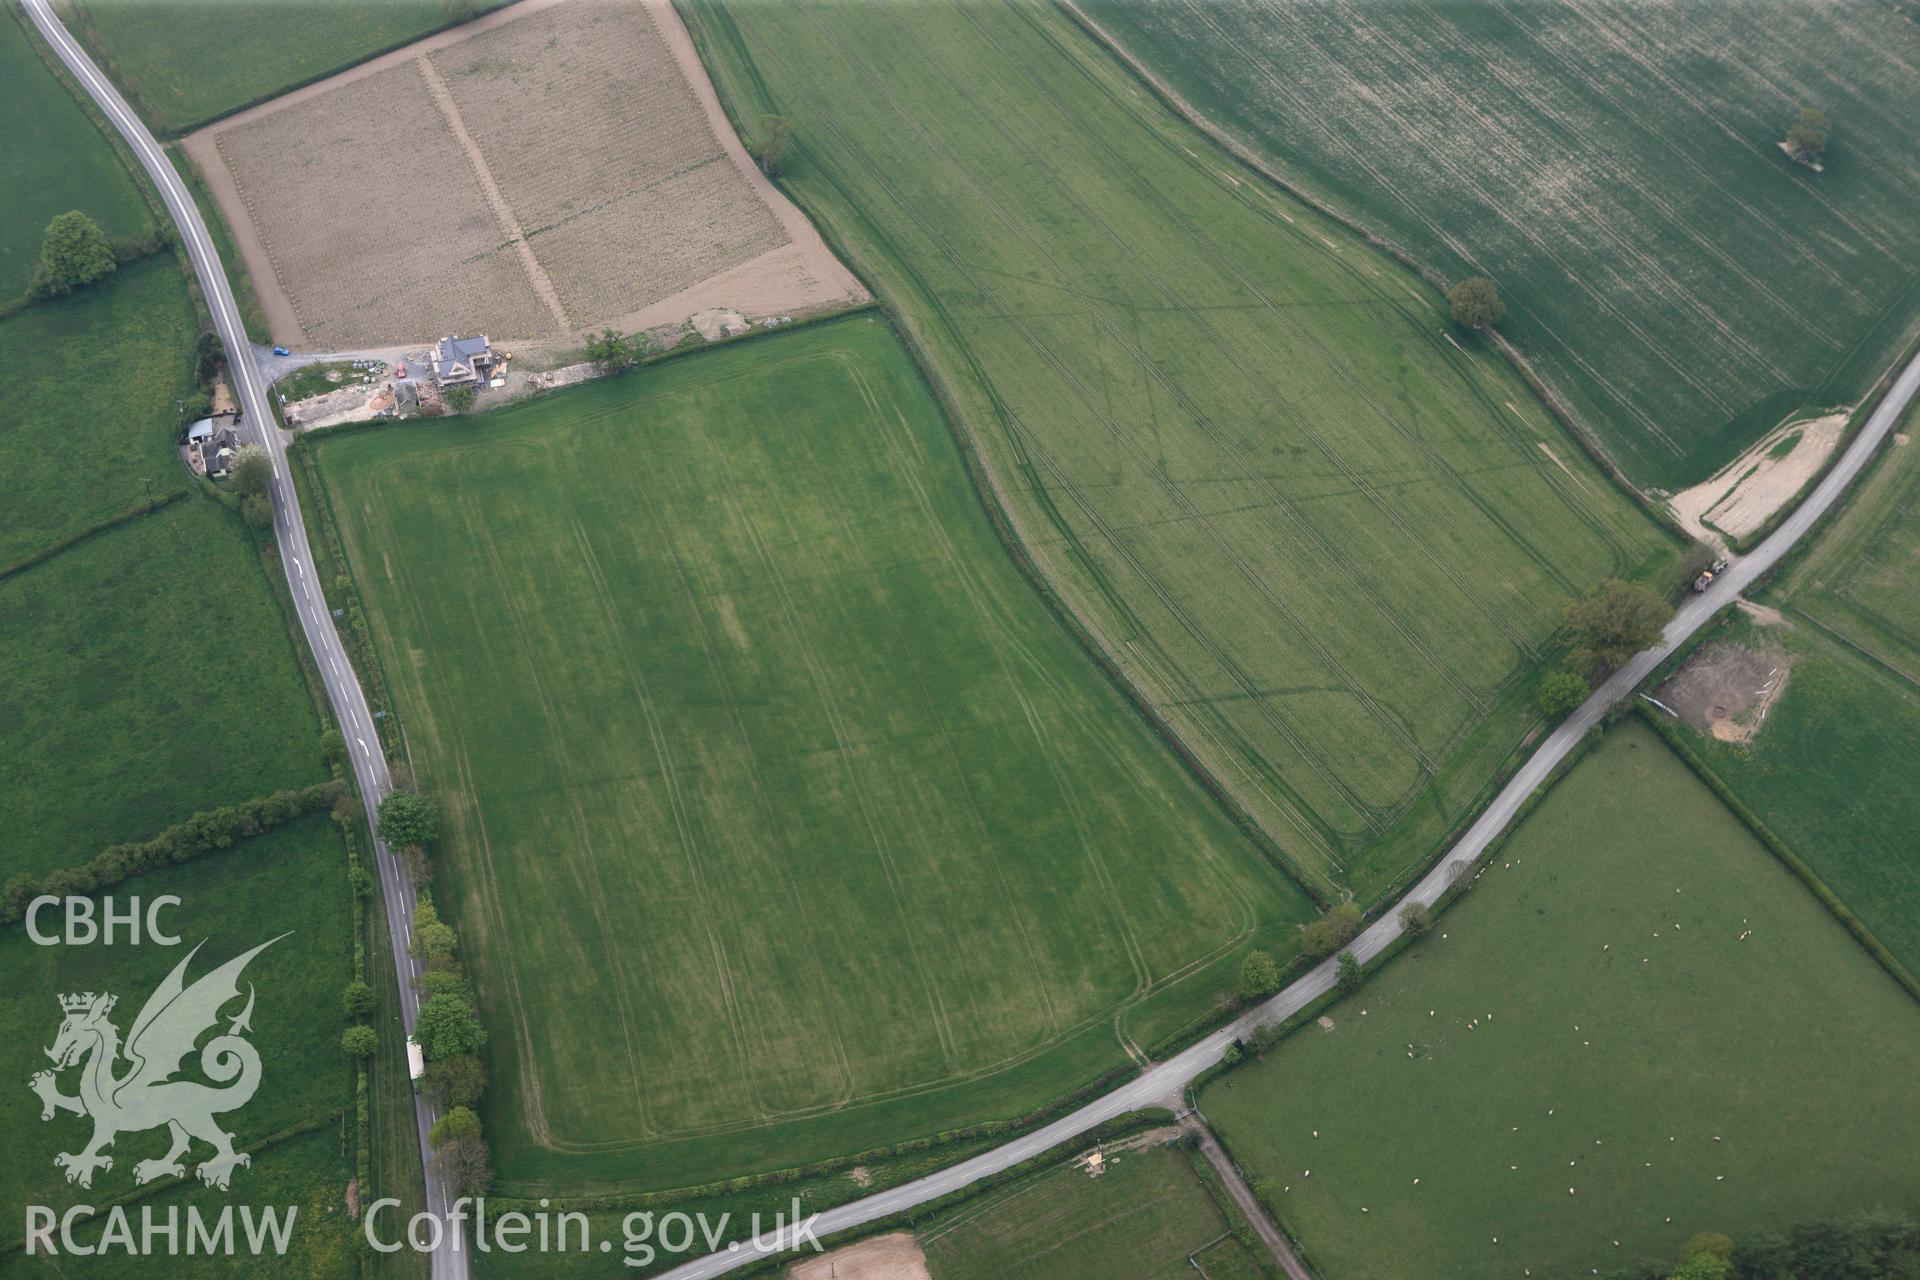 RCAHMW colour oblique photograph of Brompton or Pentrehyling Roman marching camps. Taken by Toby Driver on 26/04/2011.